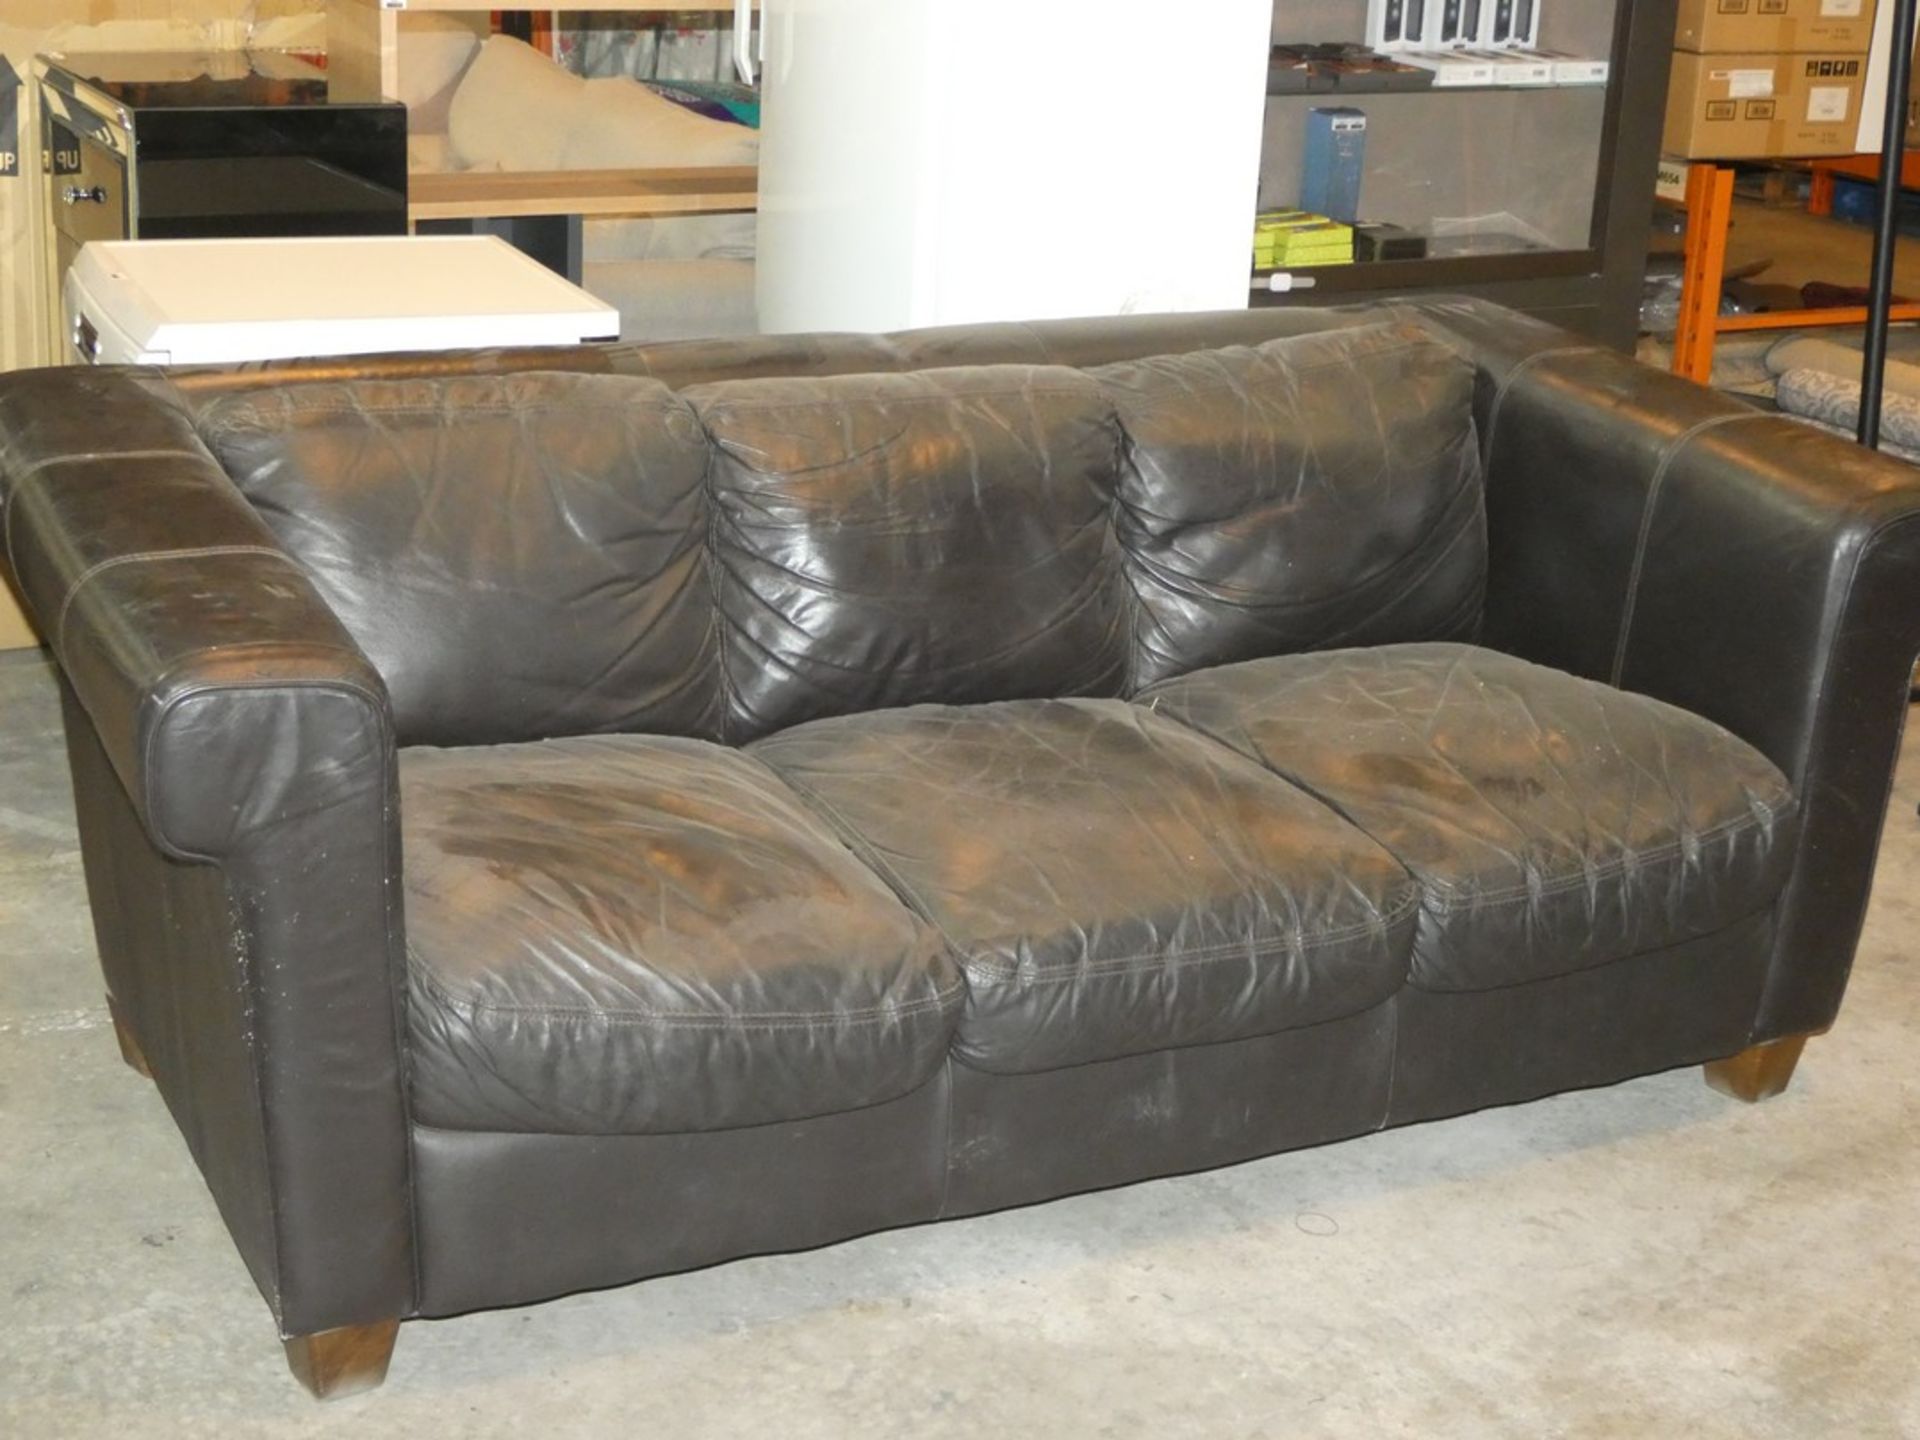 3 Seater Leather Sofa in Black